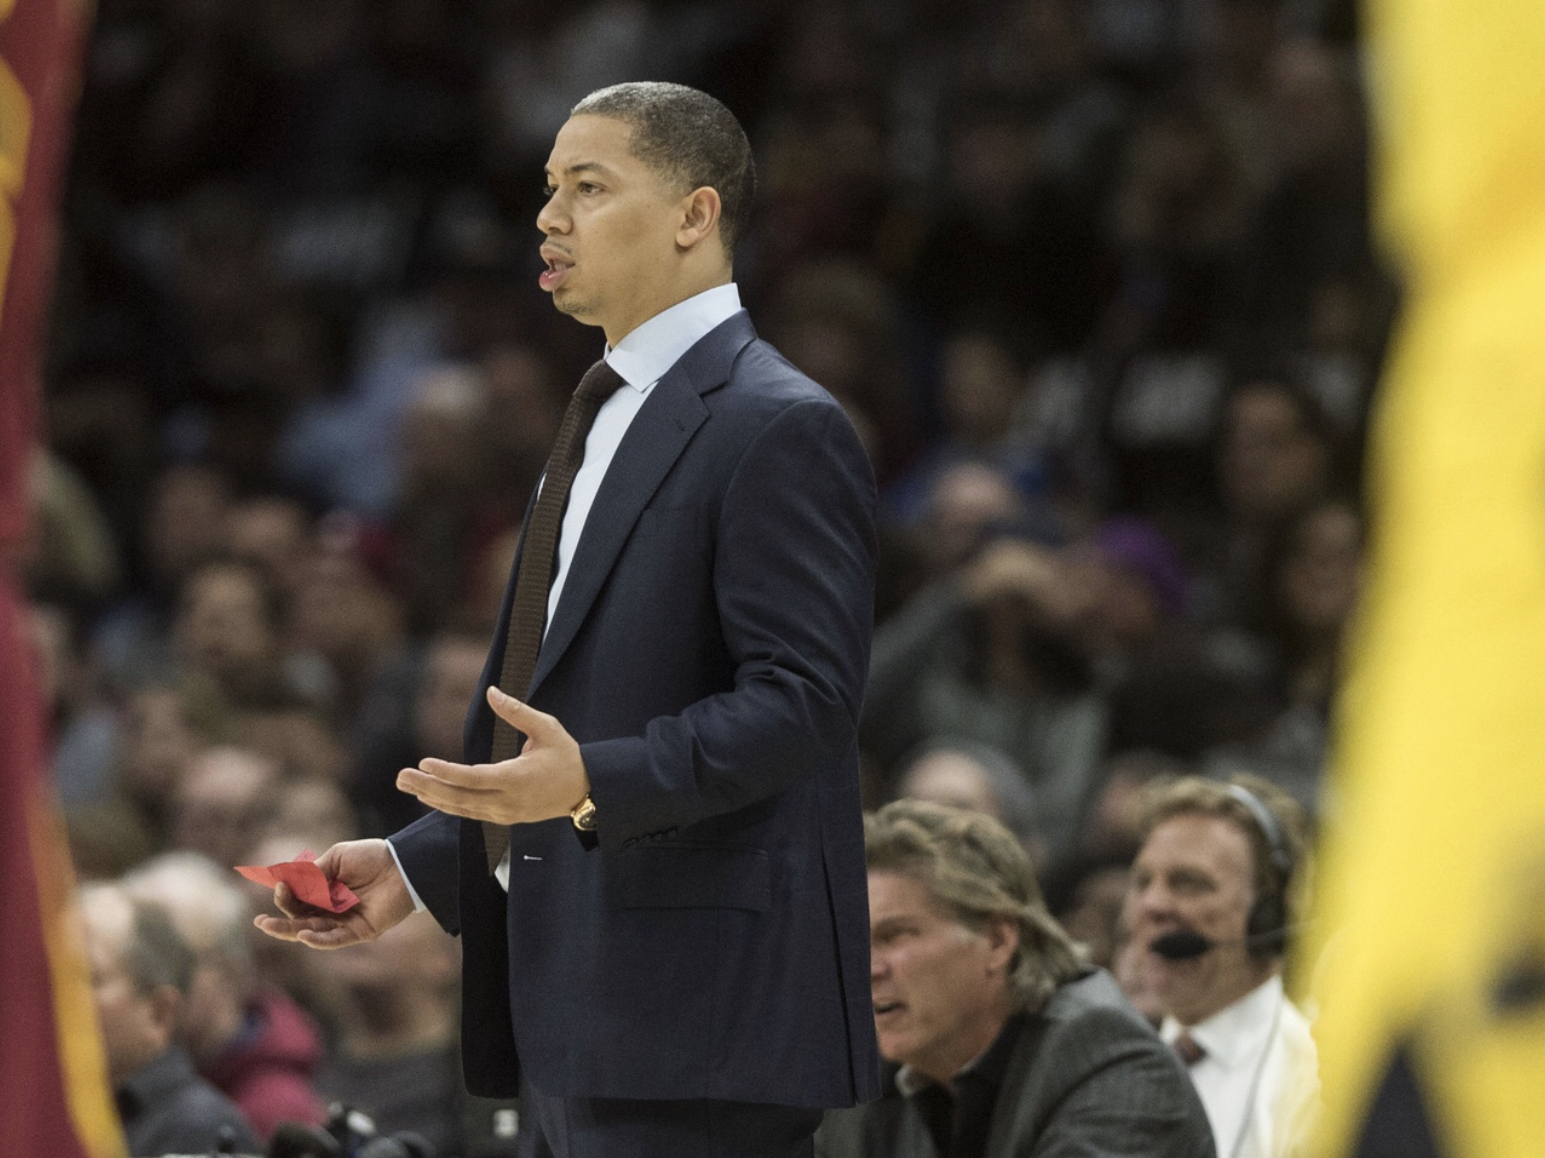 Cavs players pissed about Tyronn Lue firing, sound off on social media